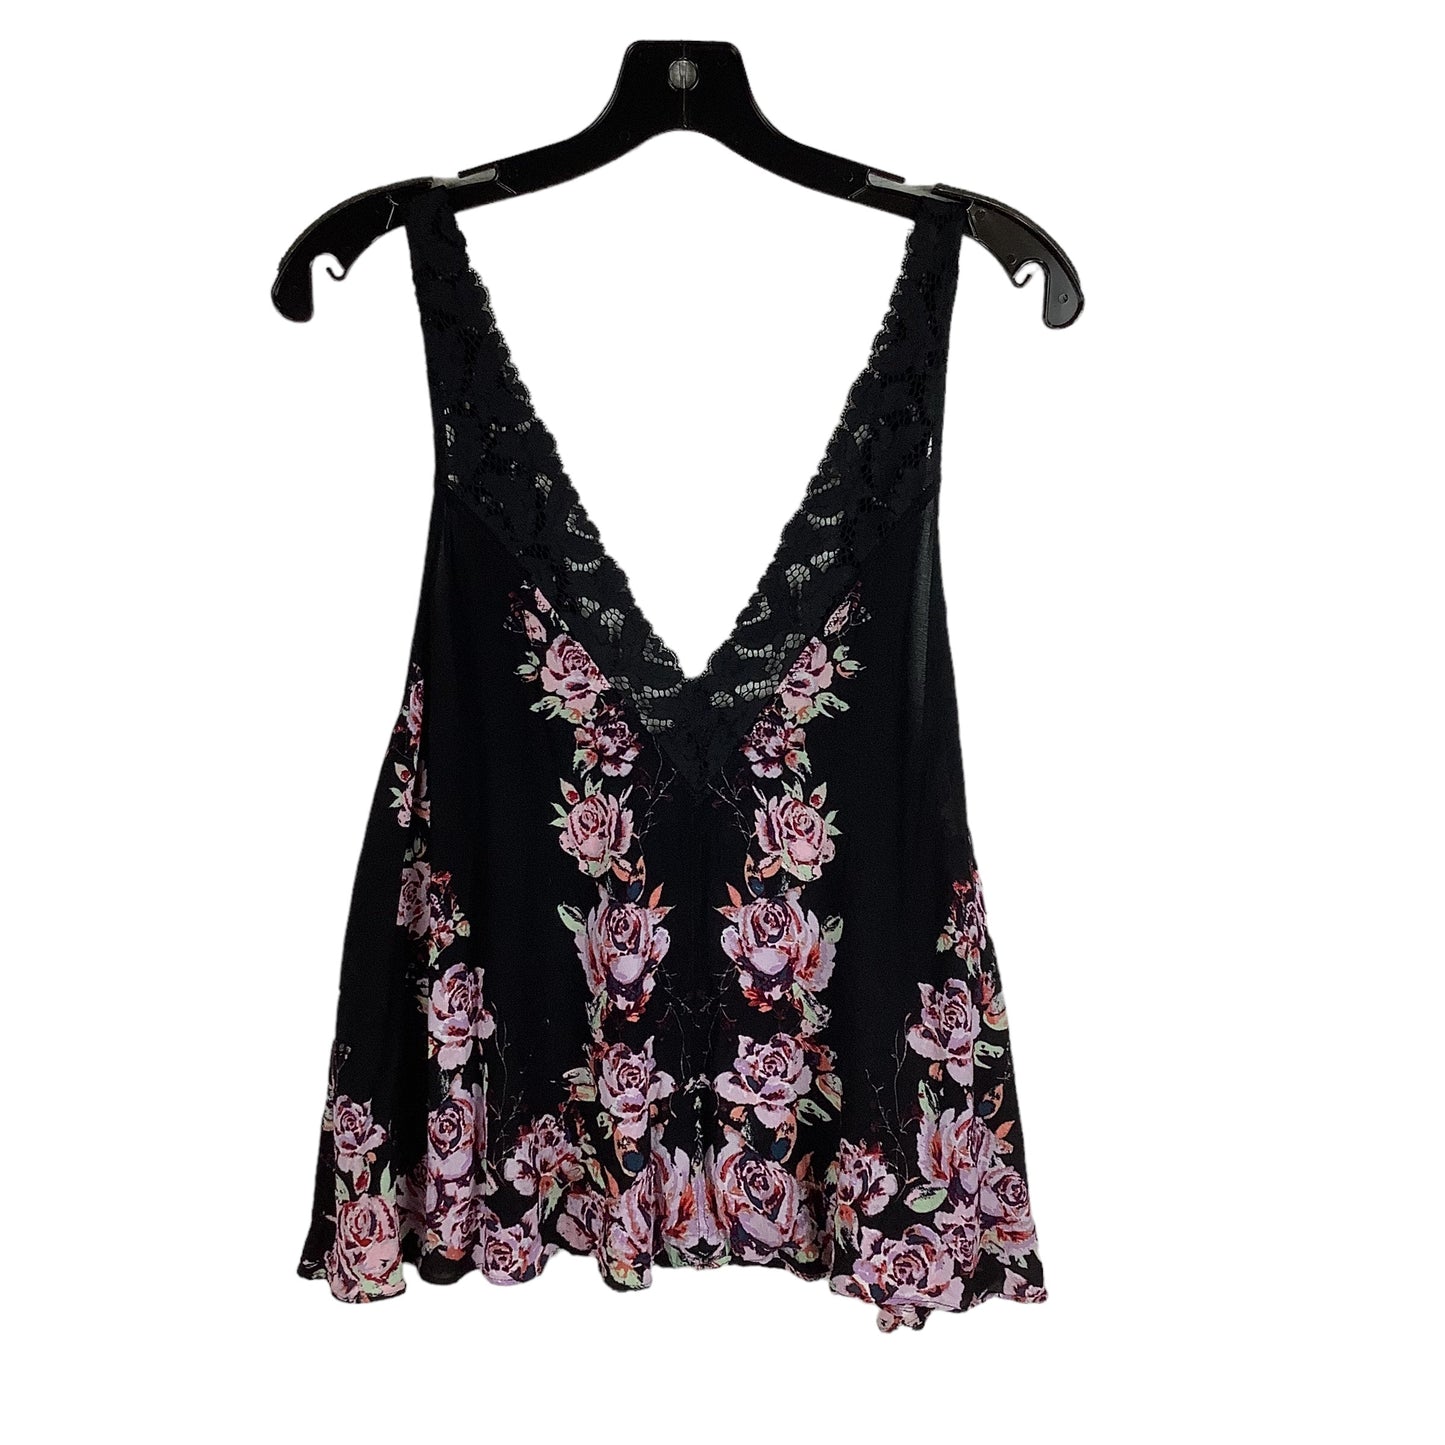 Floral Print Top Sleeveless Free People, Size M